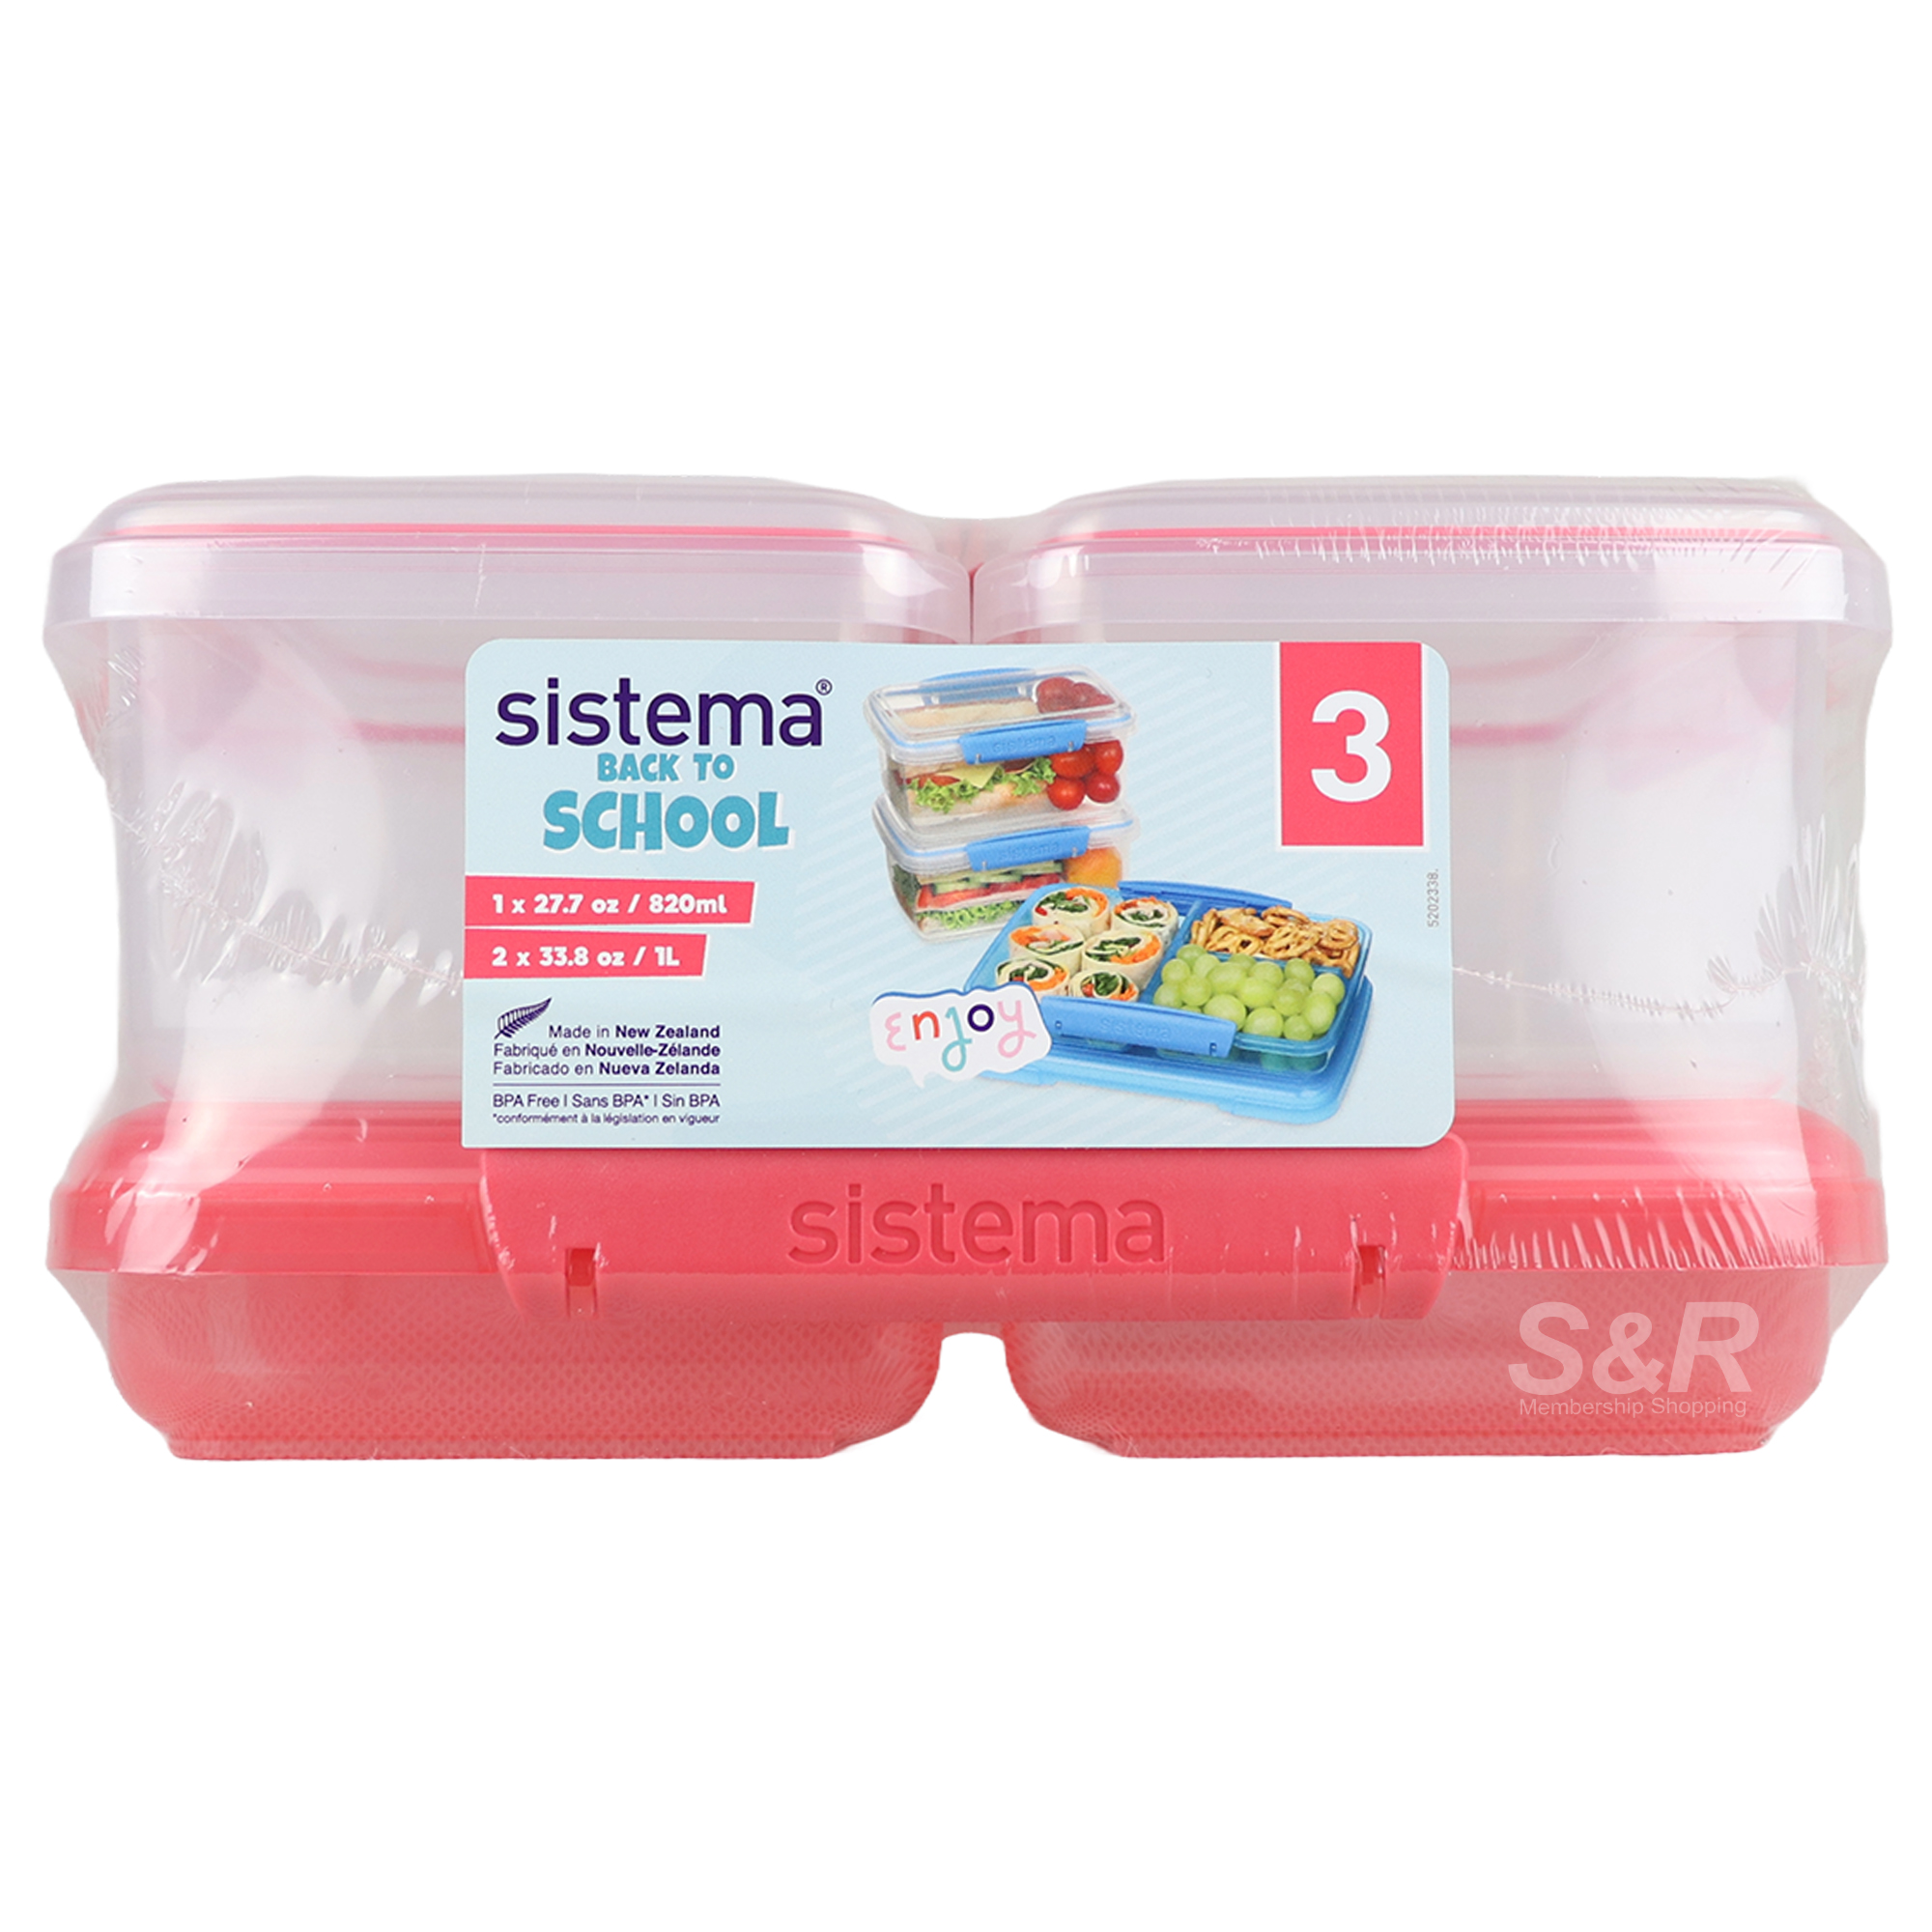 Sistema Back To School Storage Containers 3pcs